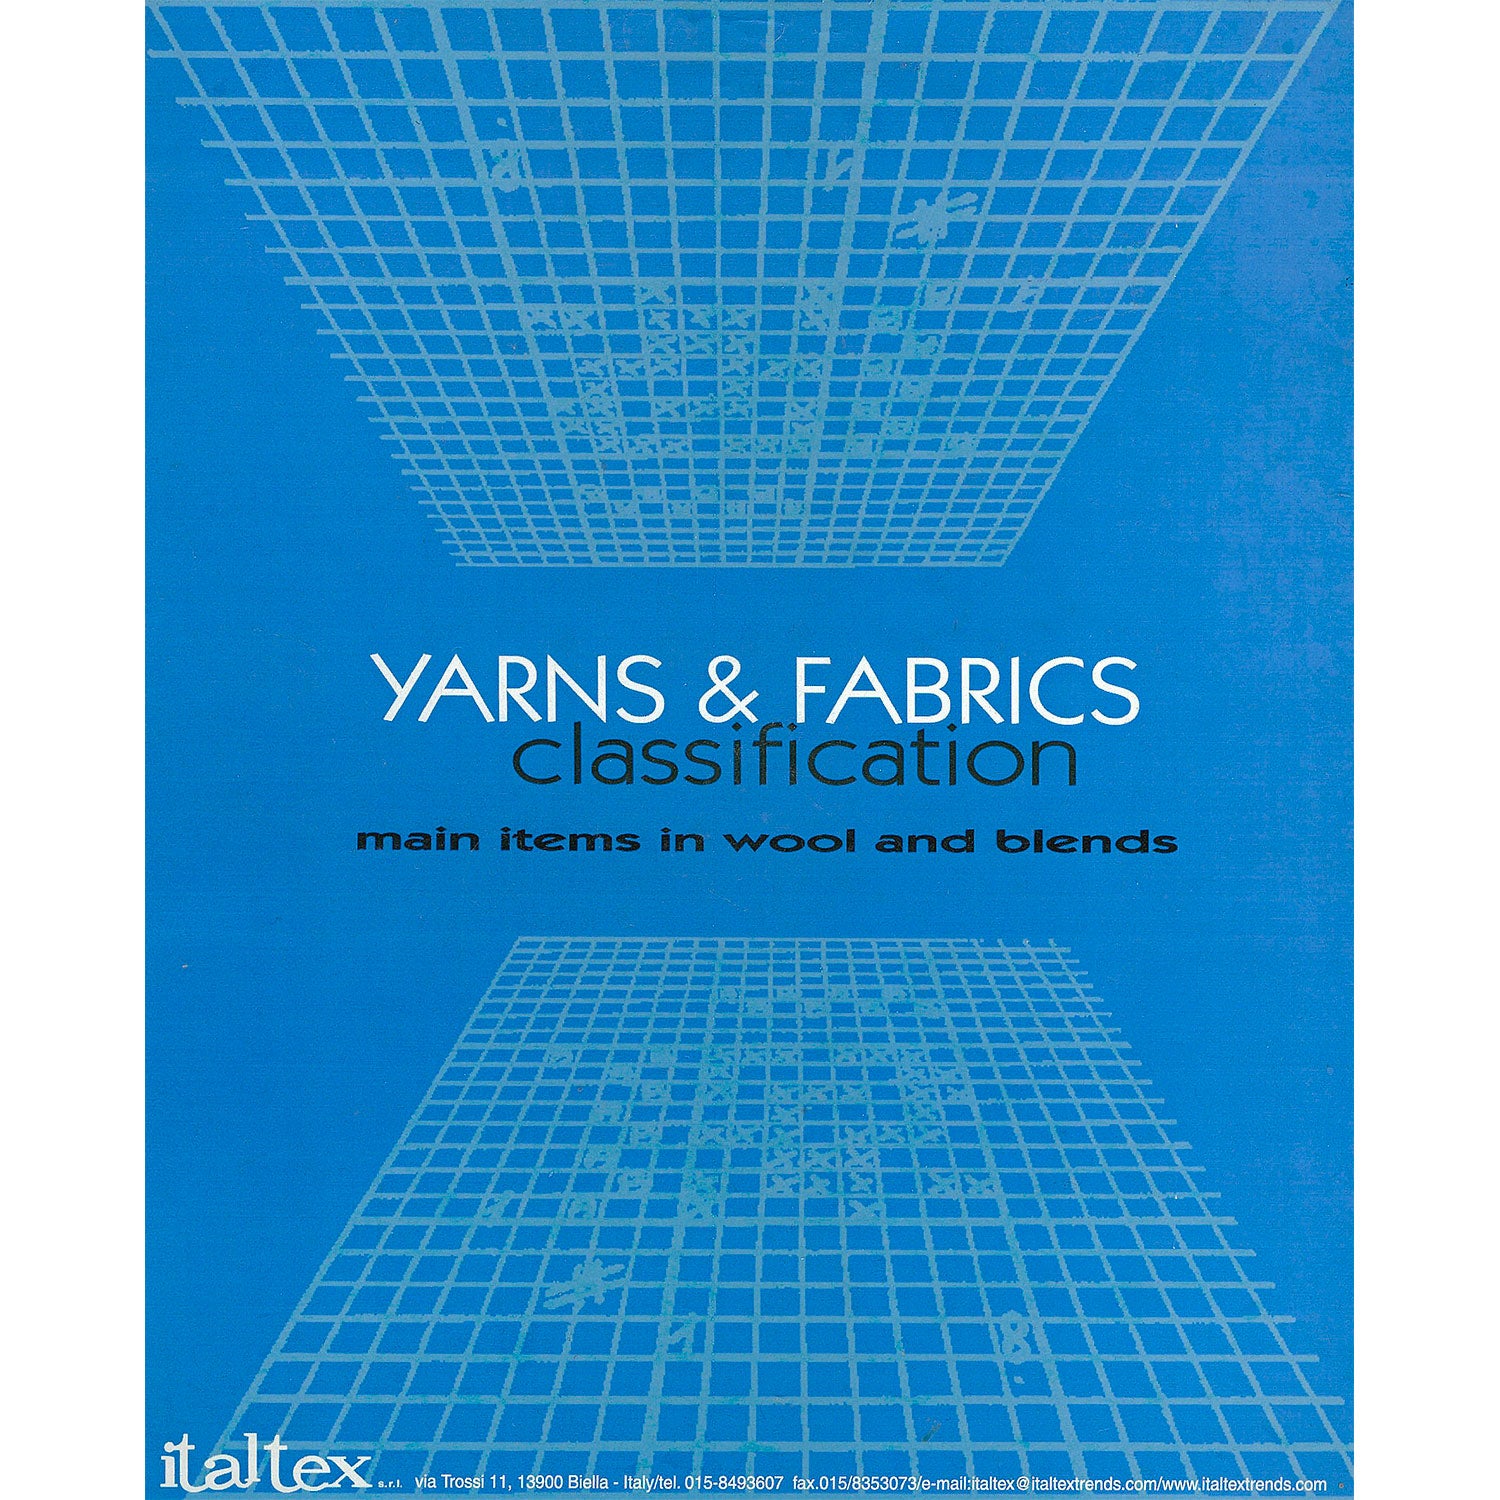 YARNS & FABRICS classification main items in wool and blends